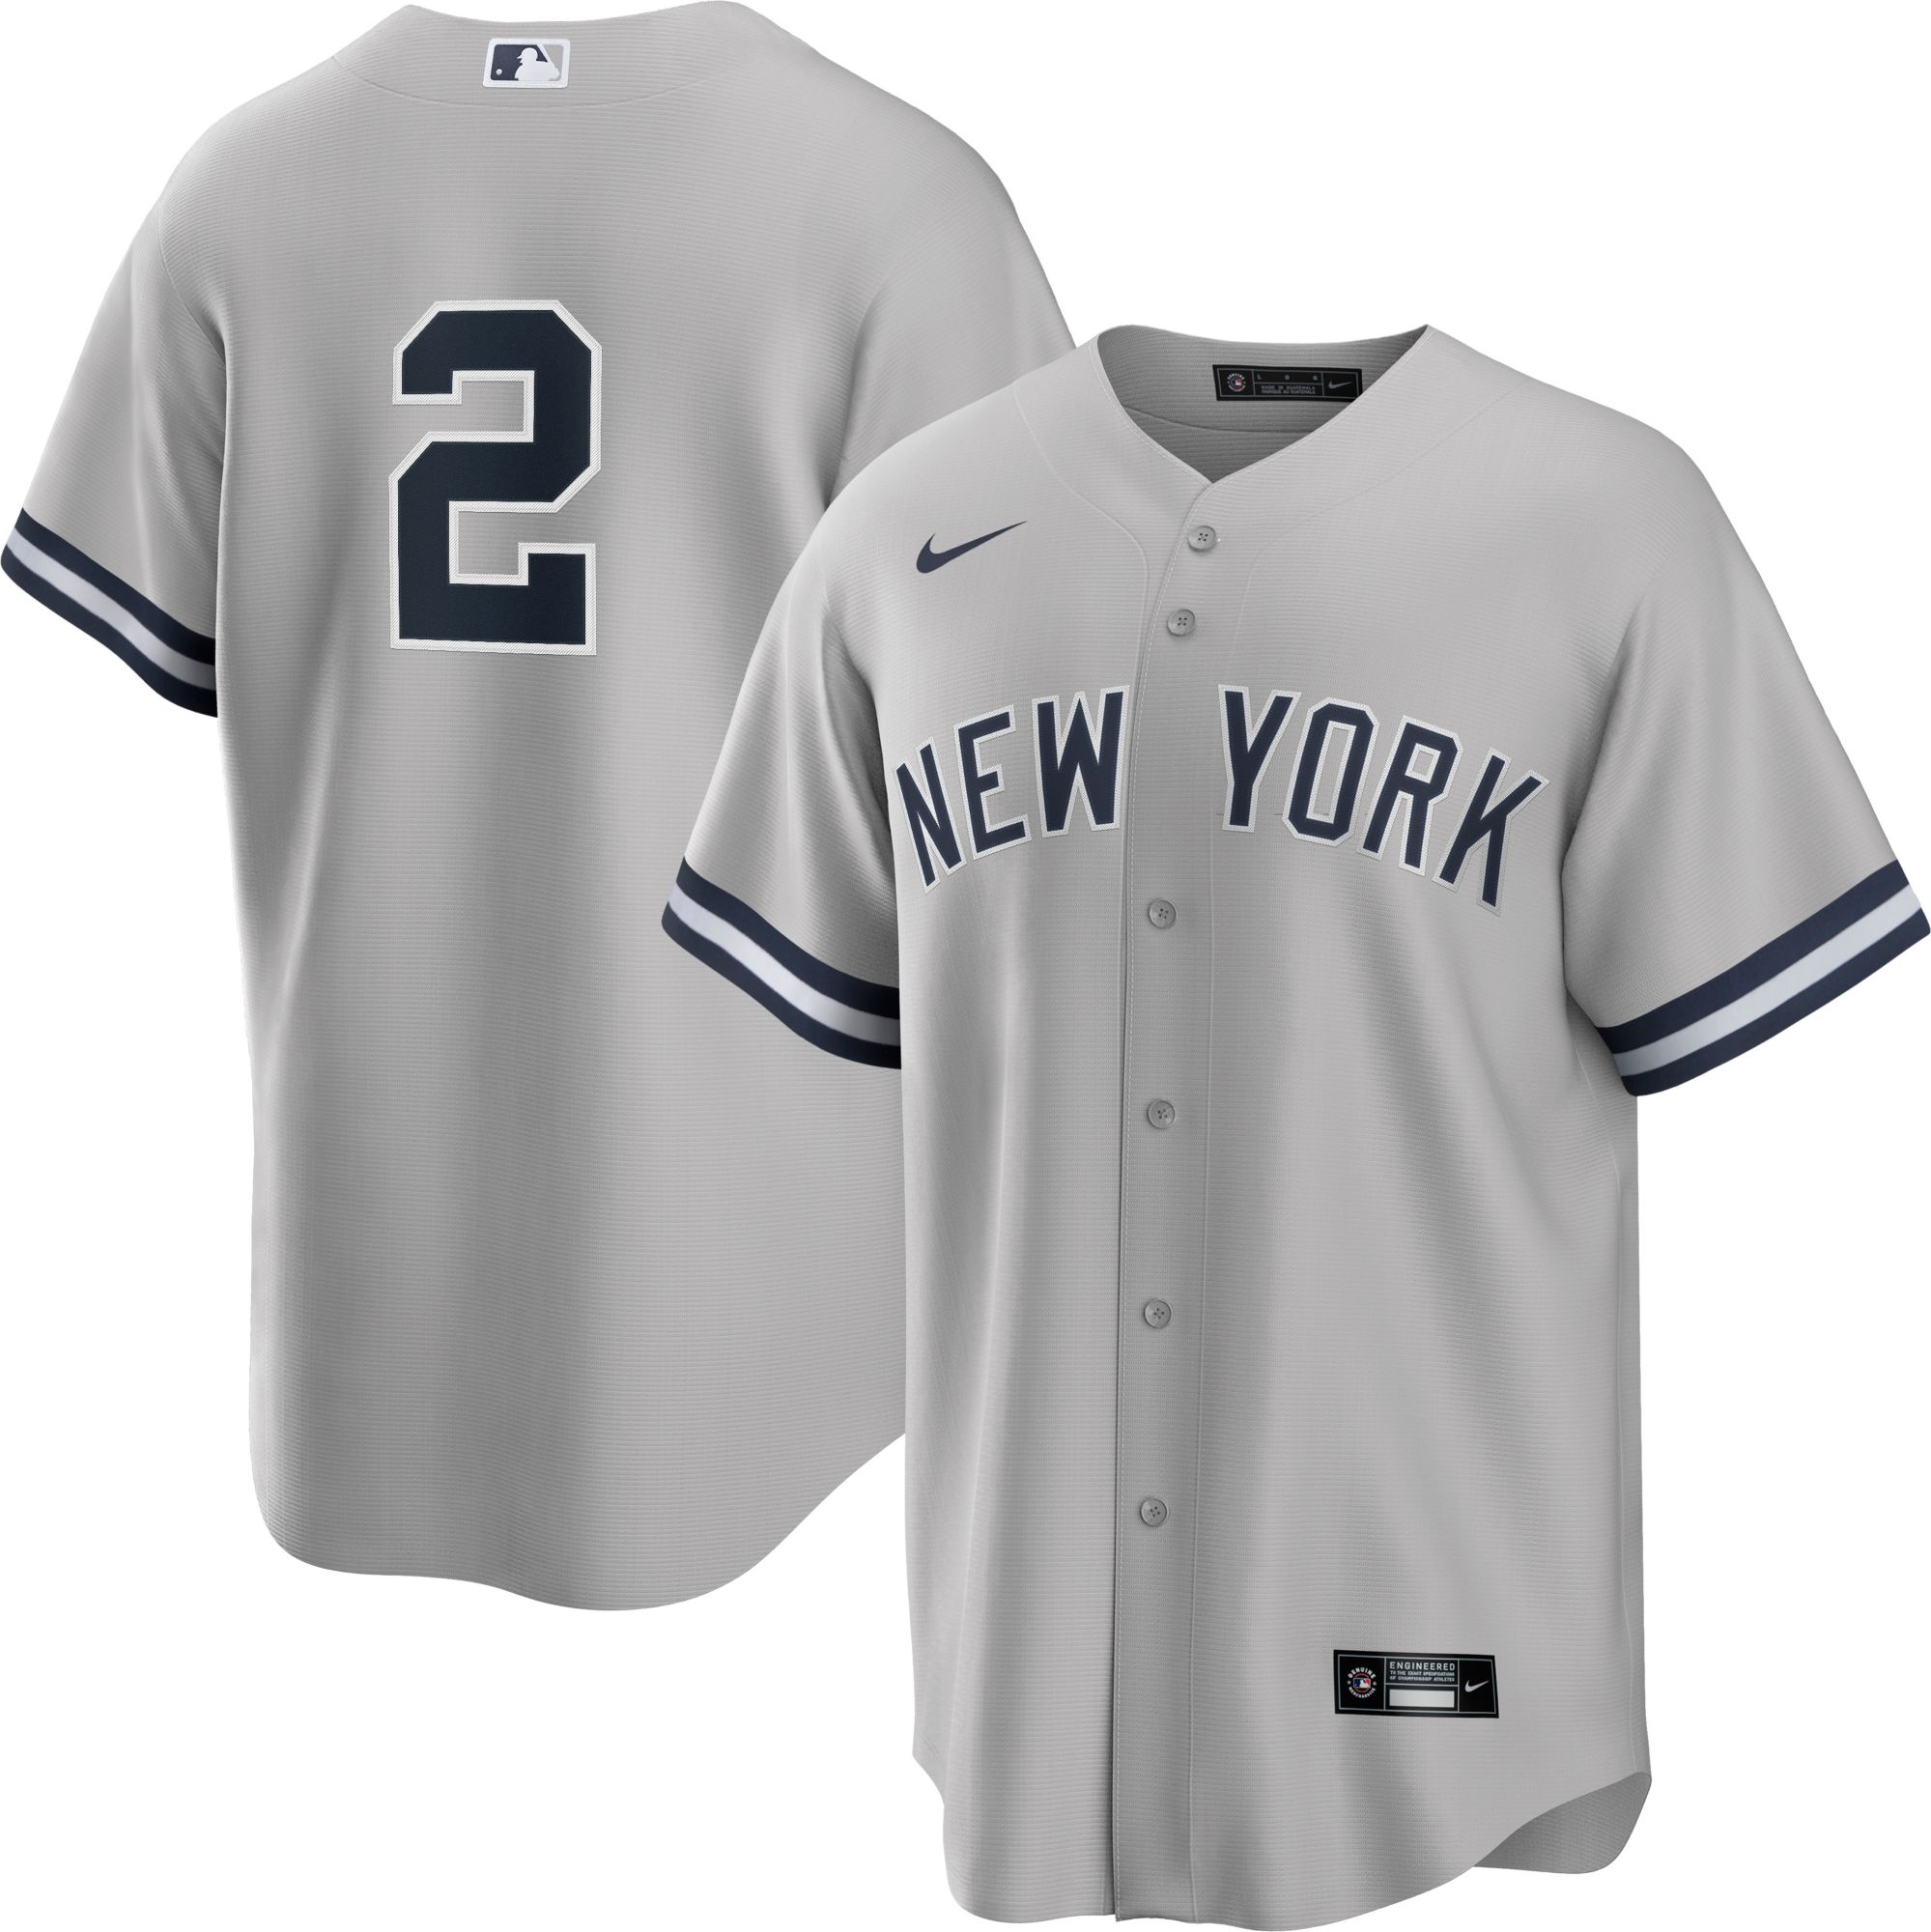  Aaron Judge New York Yankees #99 Youth 8-20 Navy Cool Base  Alternate Replica Jersey (Large 14/16) : Sports & Outdoors